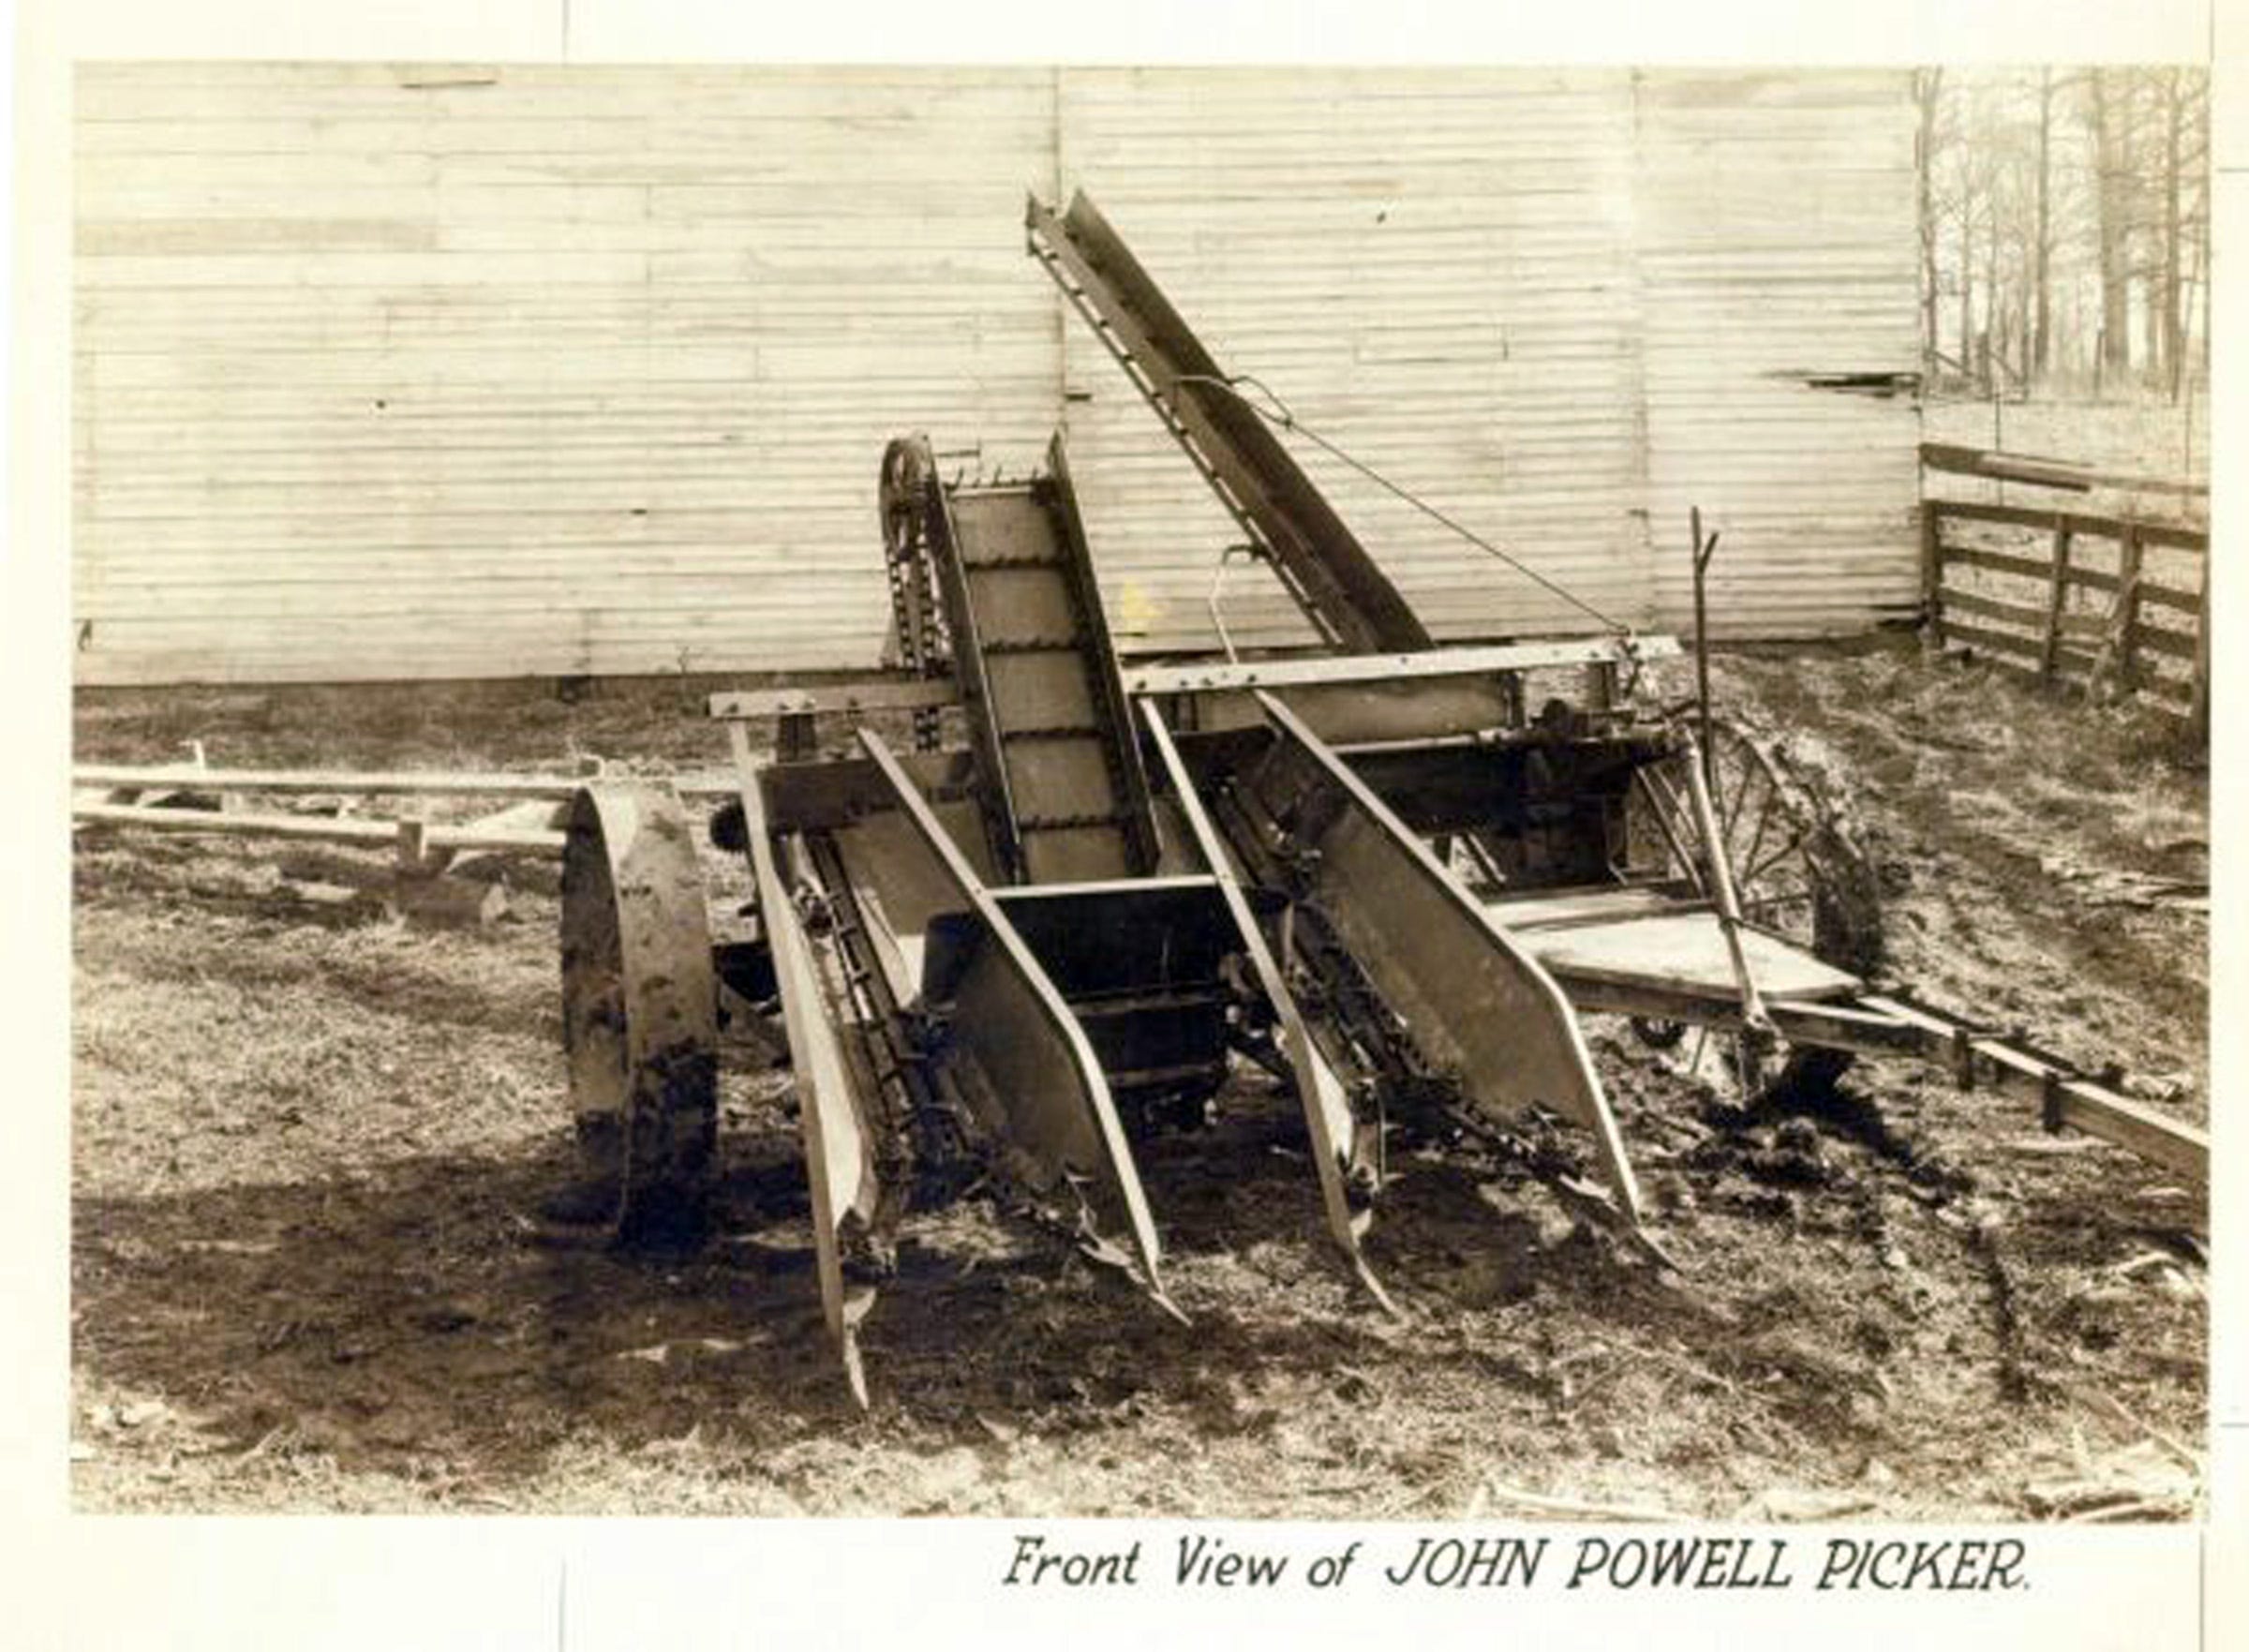 New Idea's first corn picker from 1926 was the first to use power take off, using John Powell's invention.